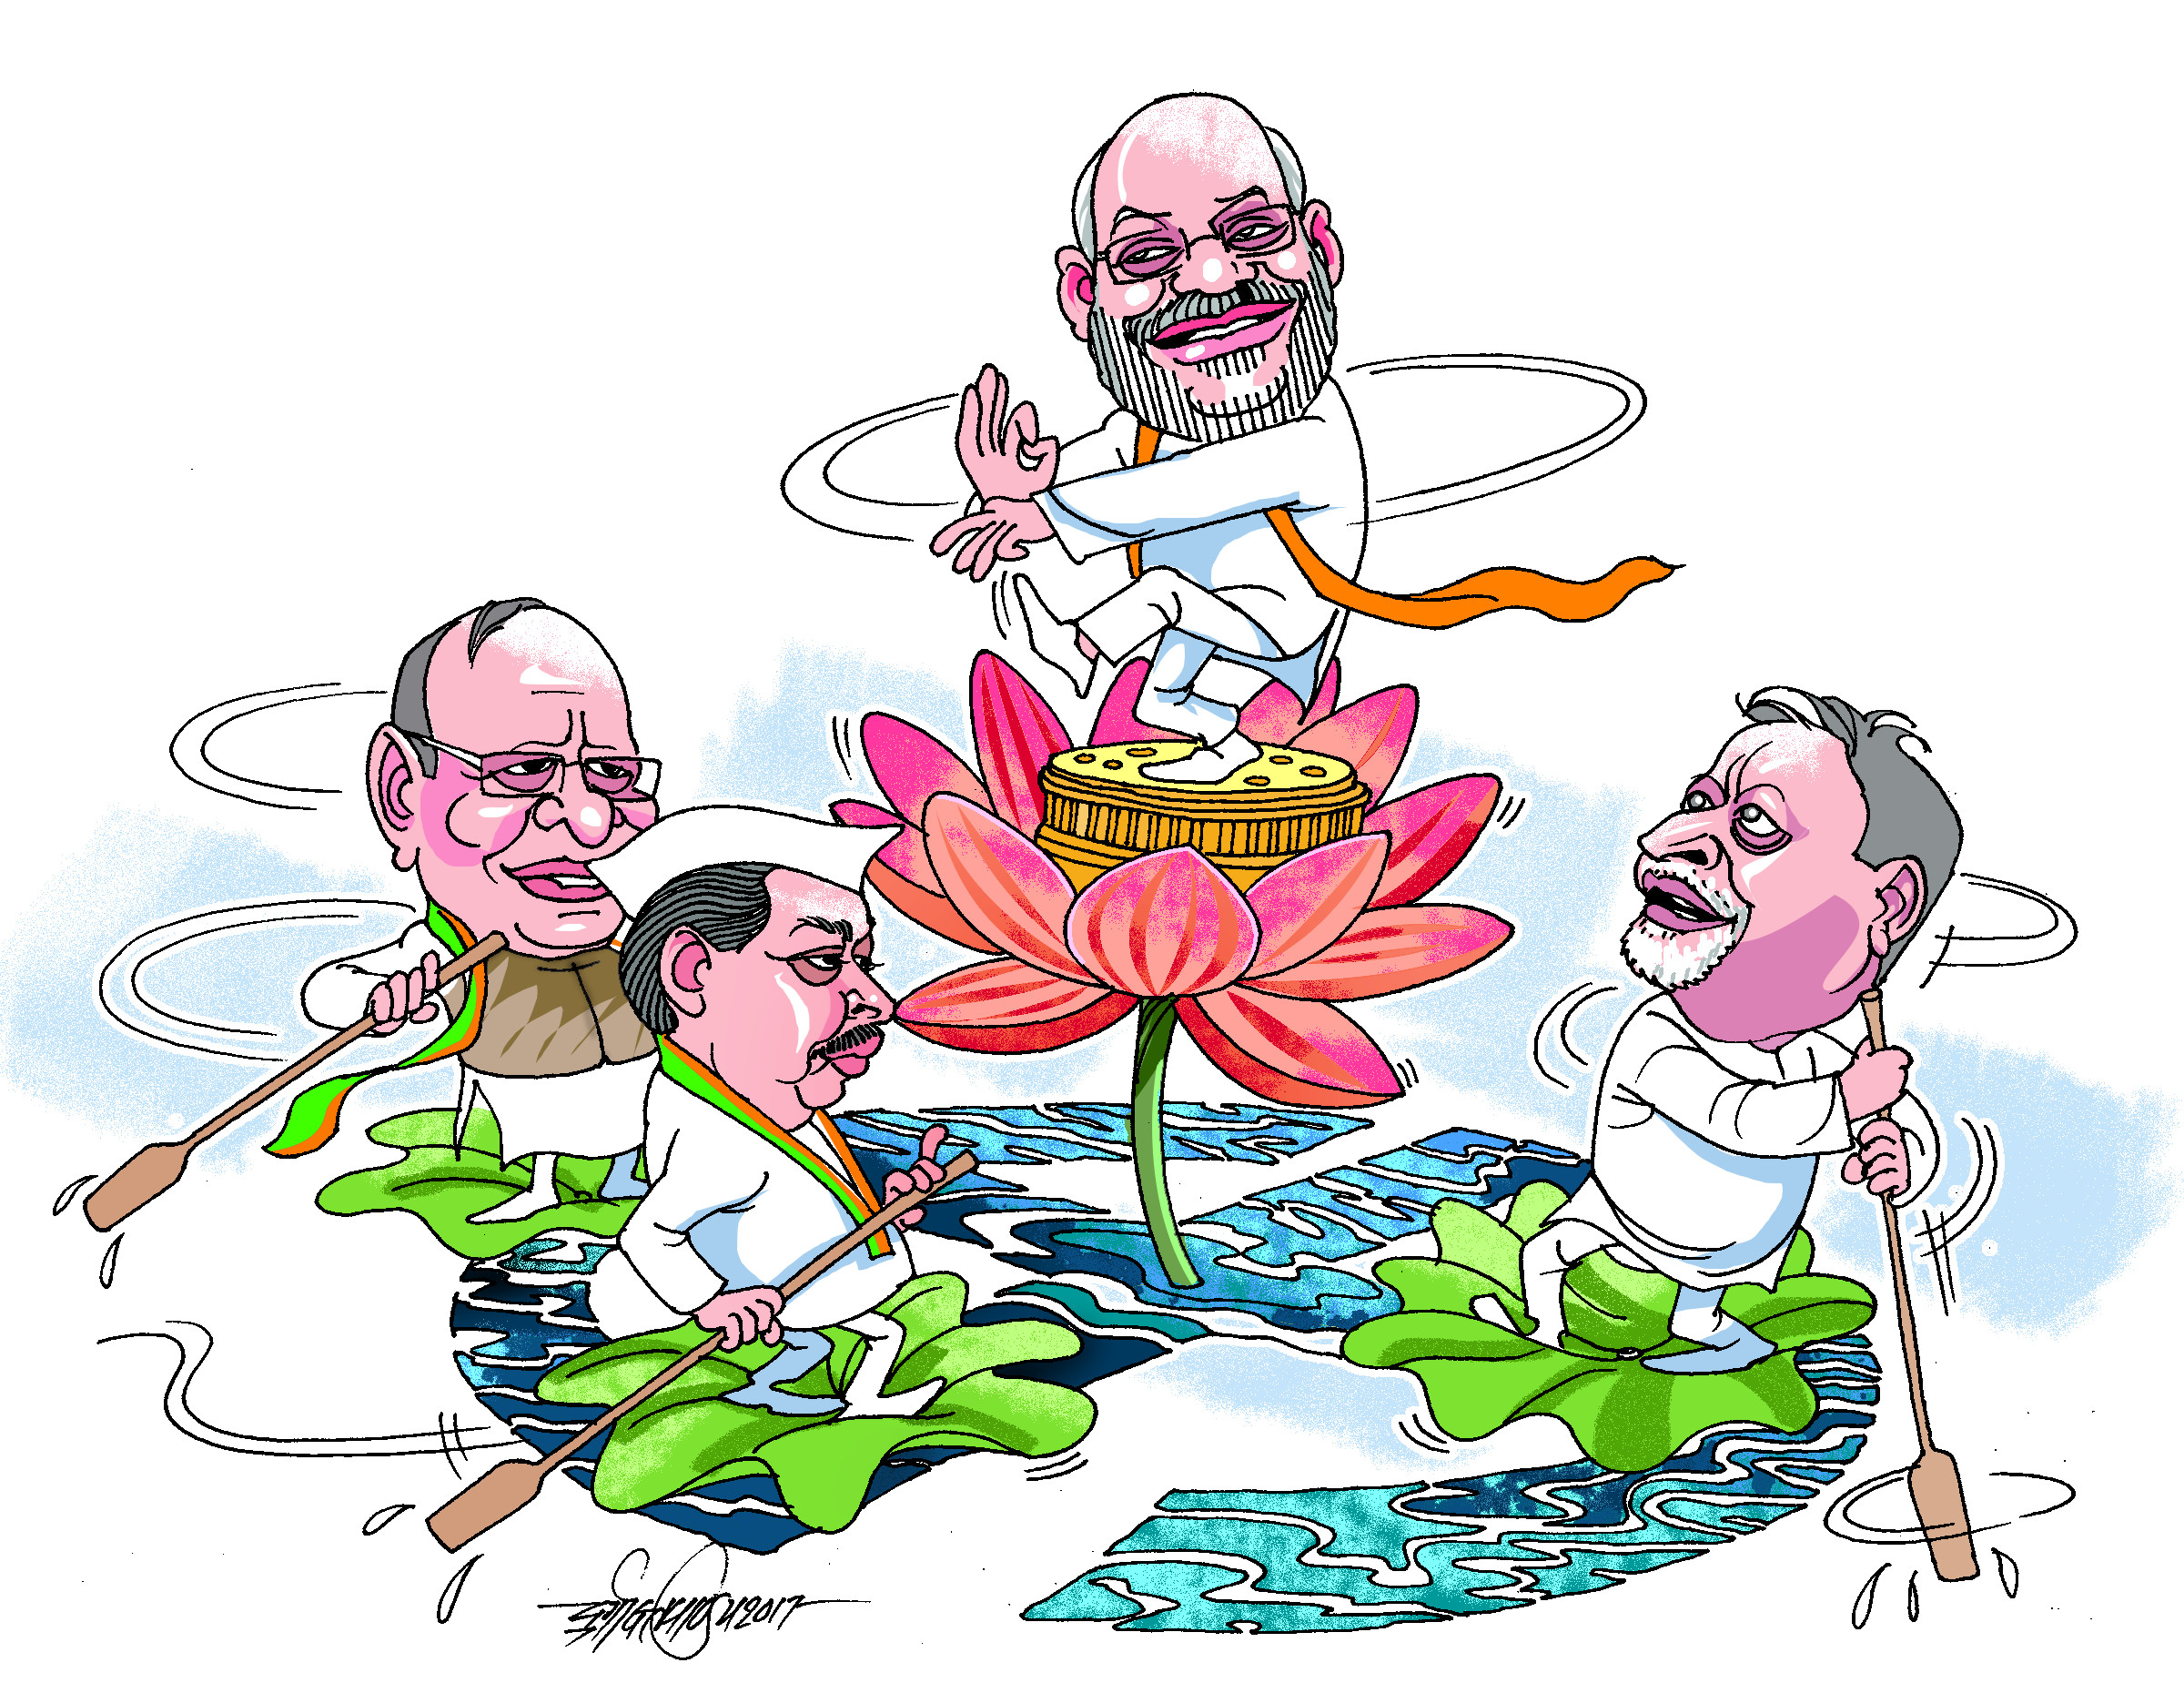 BJP has drafted leaders from other parties to enter new states